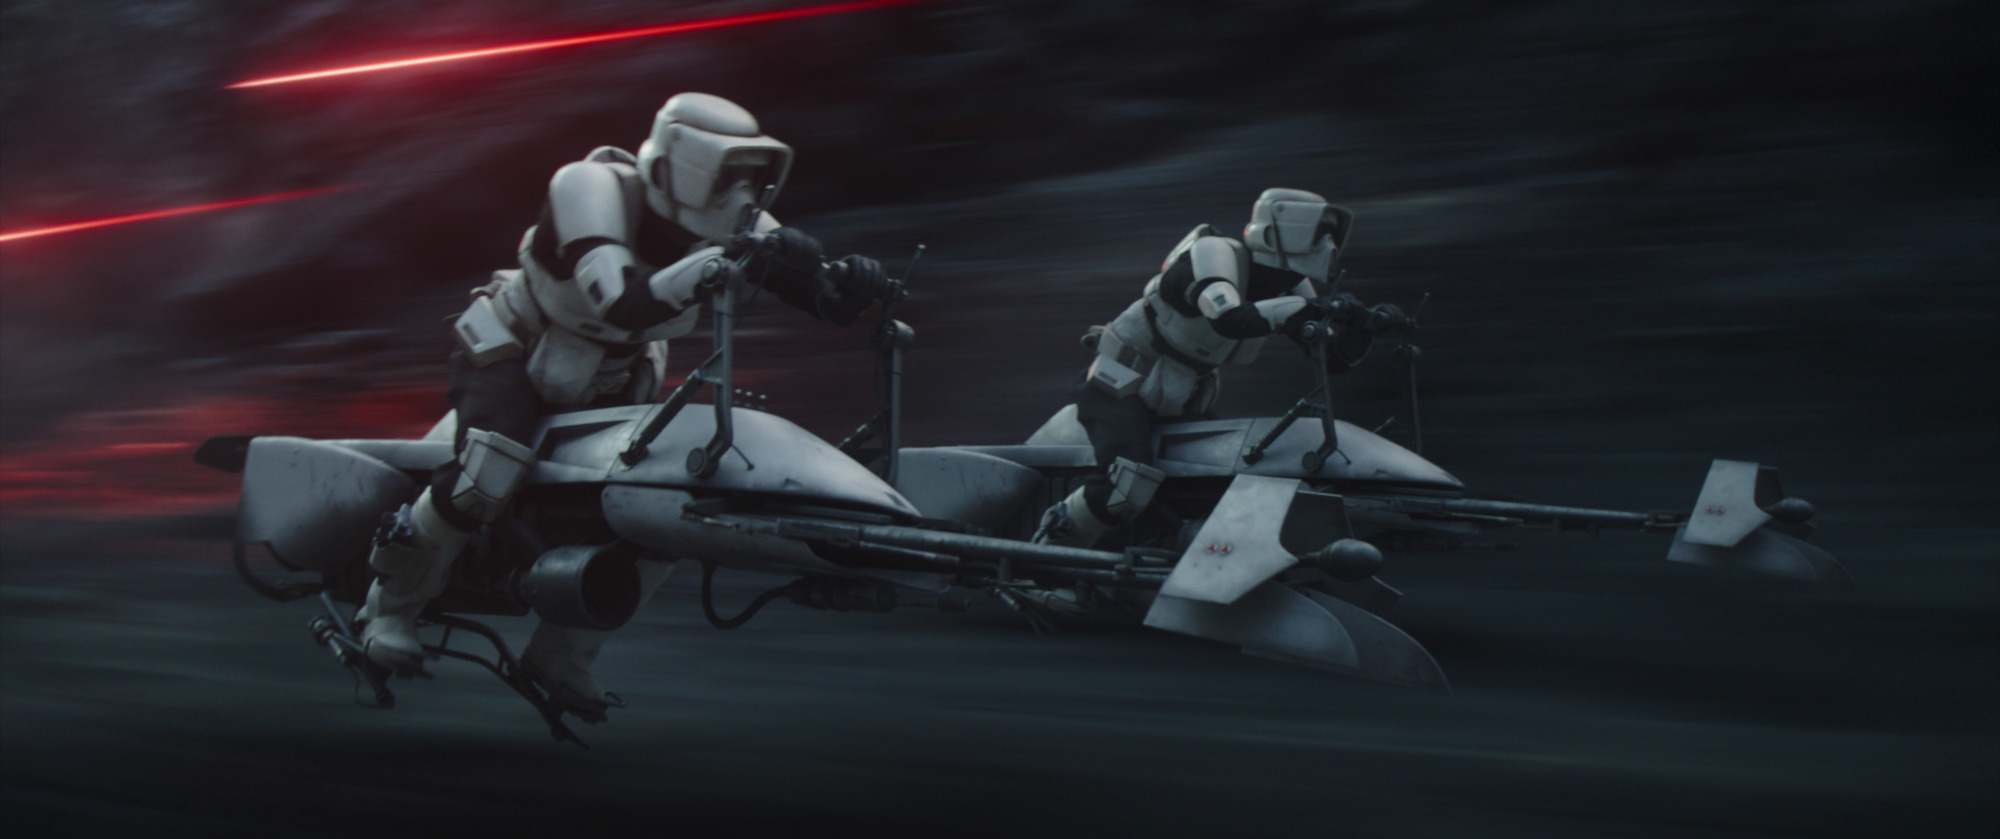 Stormtroopers chase after Din Djarin in 'The Mandalorian' "The Siege"